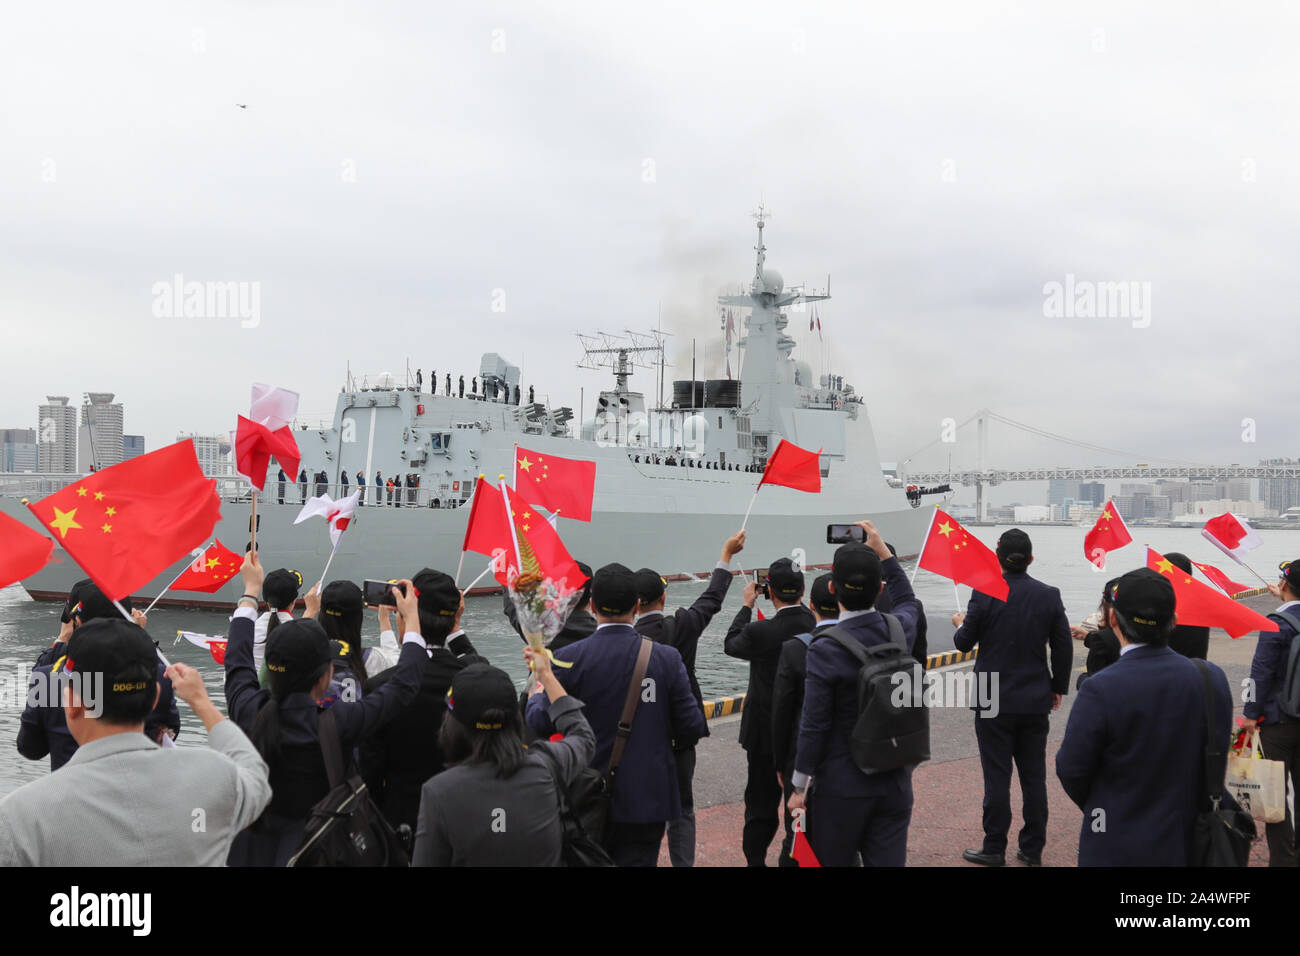 Tokyo, Japan. 16th Oct, 2019. People attend a farewell ceremony for the Chinese naval destroyer Taiyuan at the Harumi Pier in Tokyo, Japan, Oct. 16, 2019. Chinese naval destroyer Taiyuan left here to return to China after an international fleet review. Credit: Ma Caoran/Xinhua/Alamy Live News Stock Photo